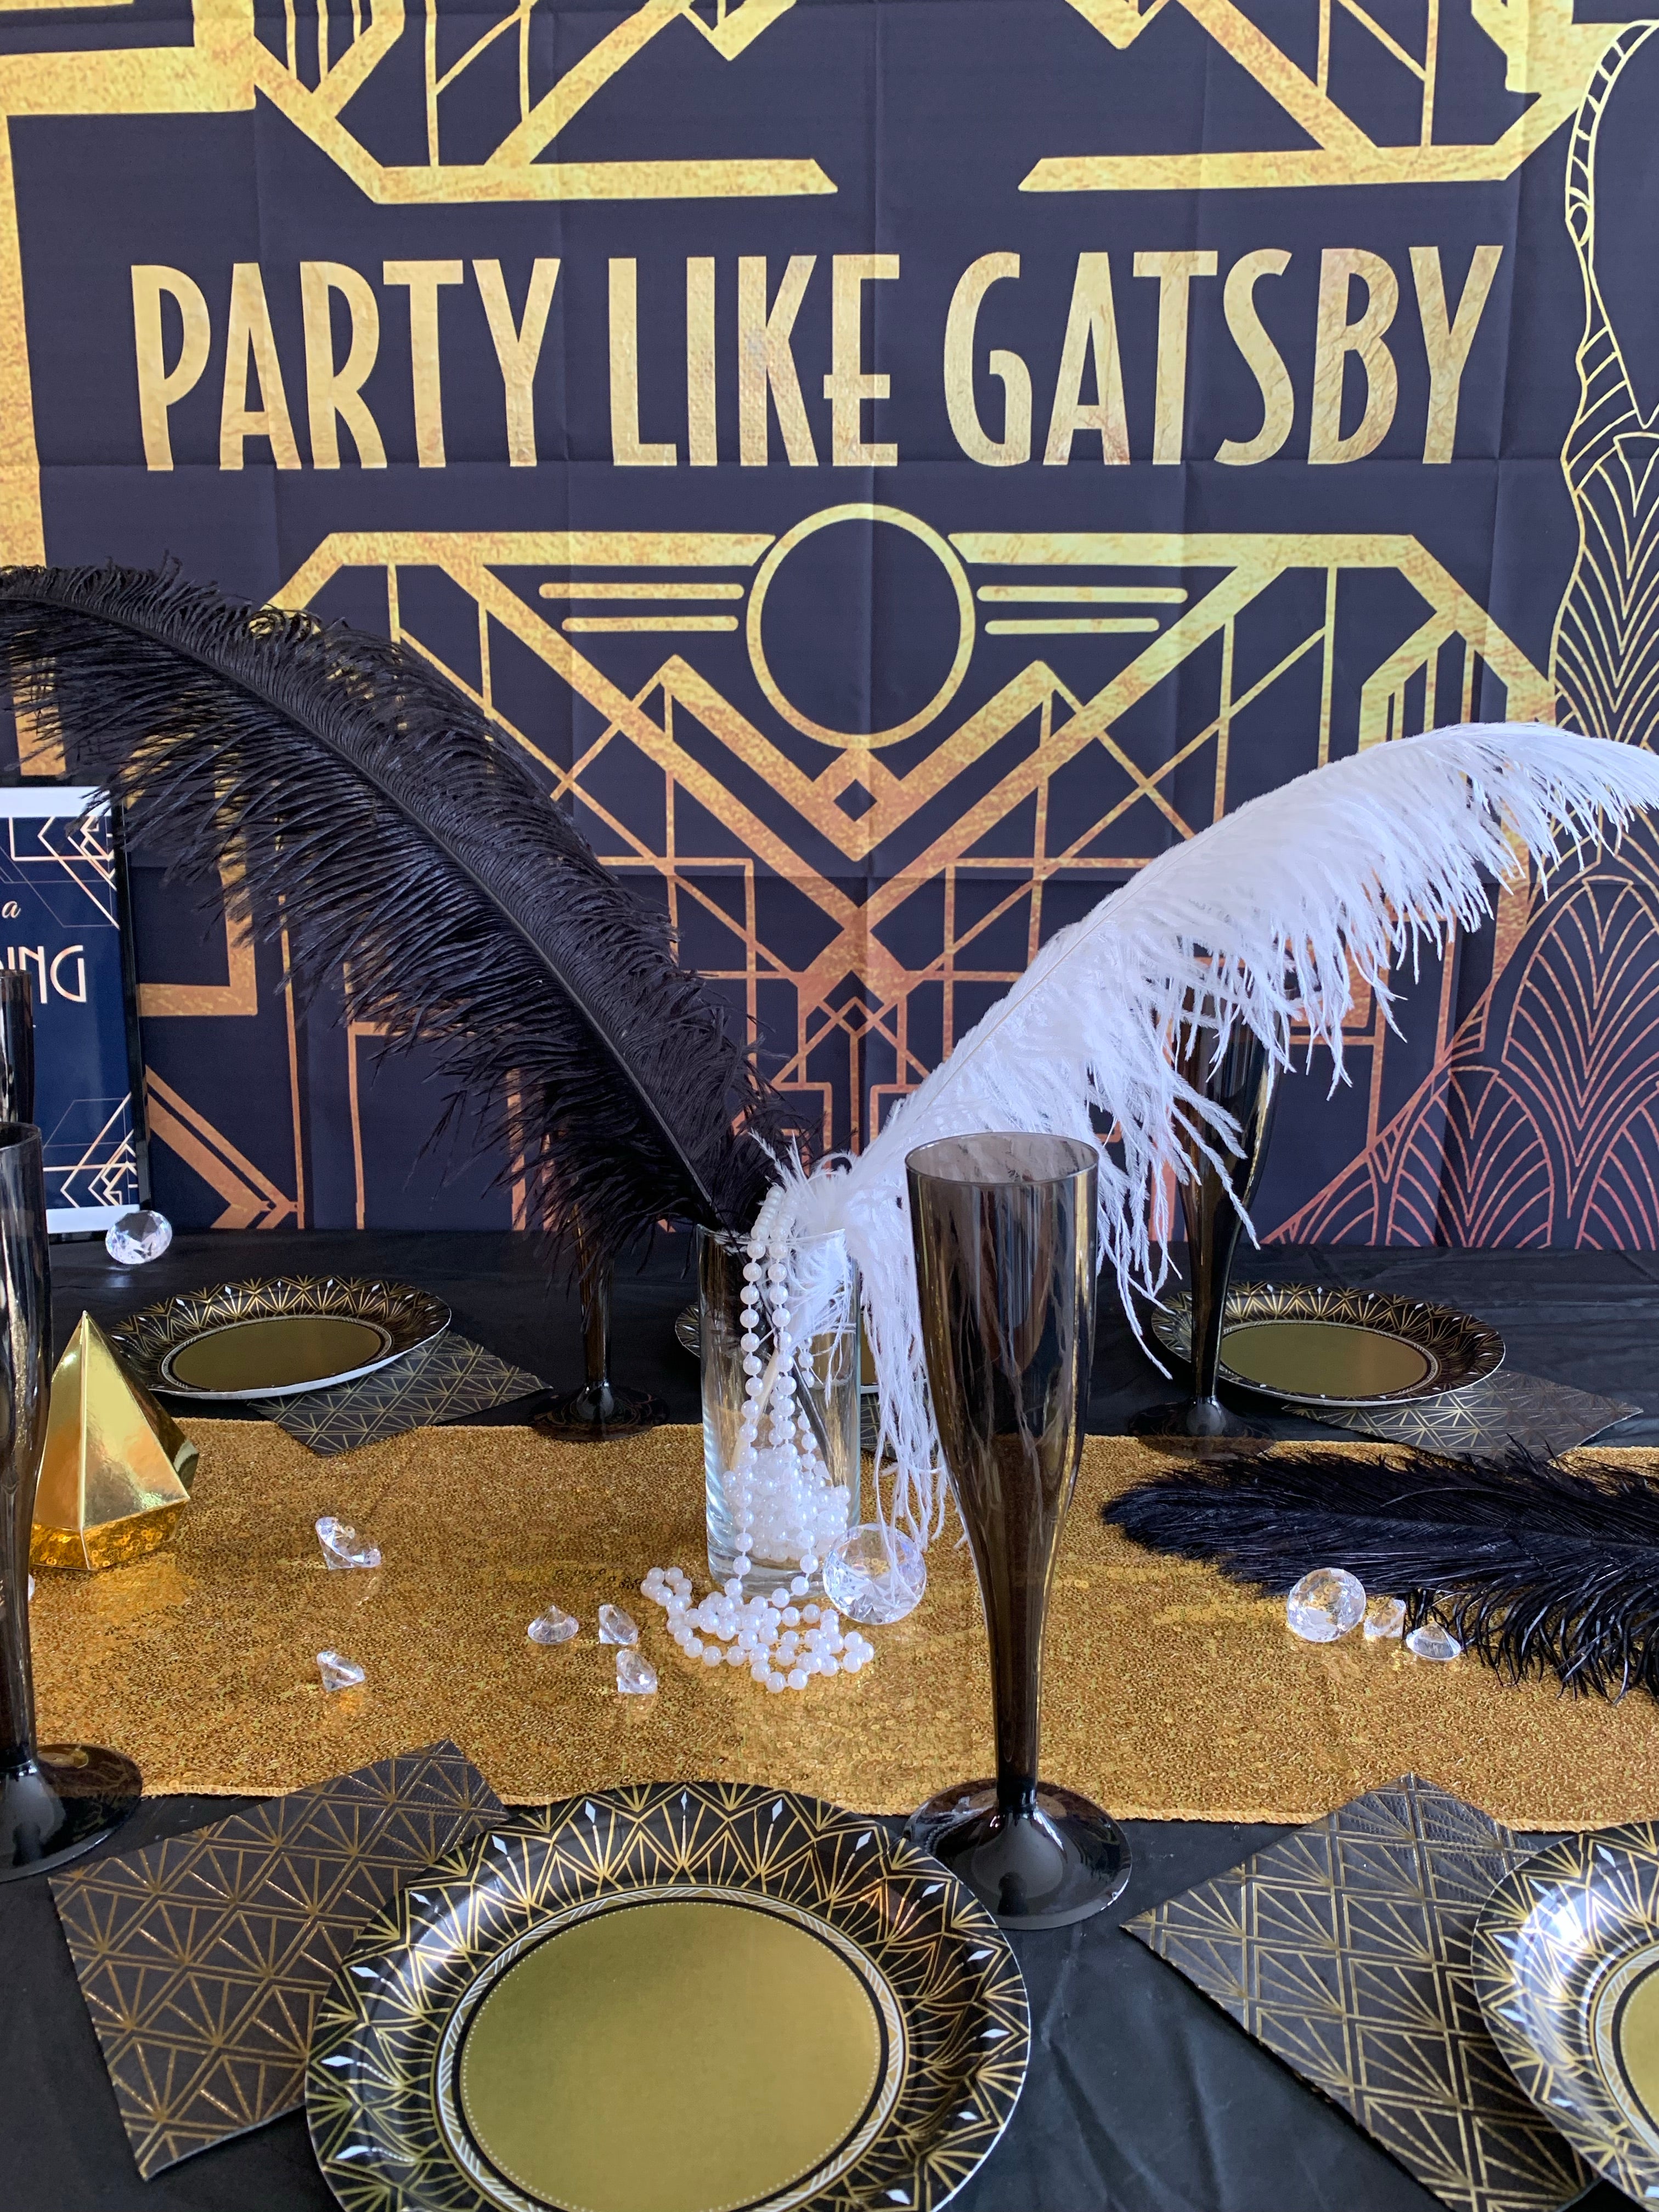 Gatsby party supplies